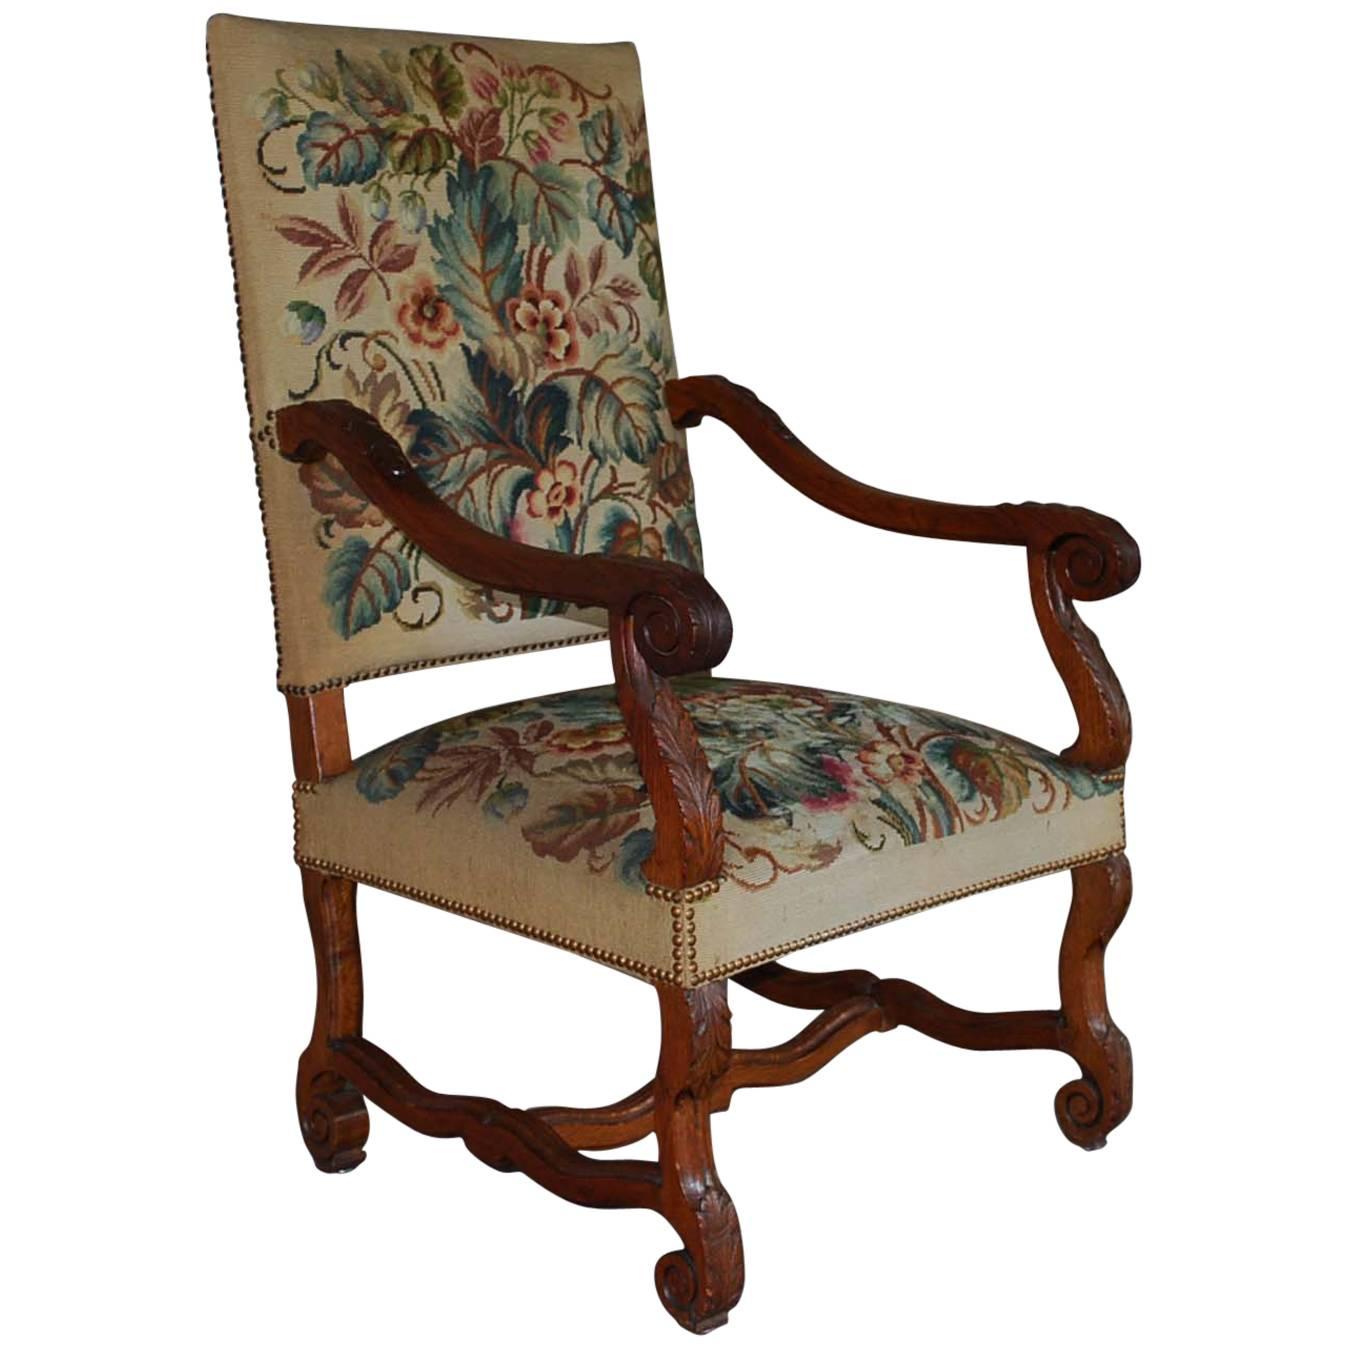 Late 19th Century Oak and Needlepoint Chair For Sale